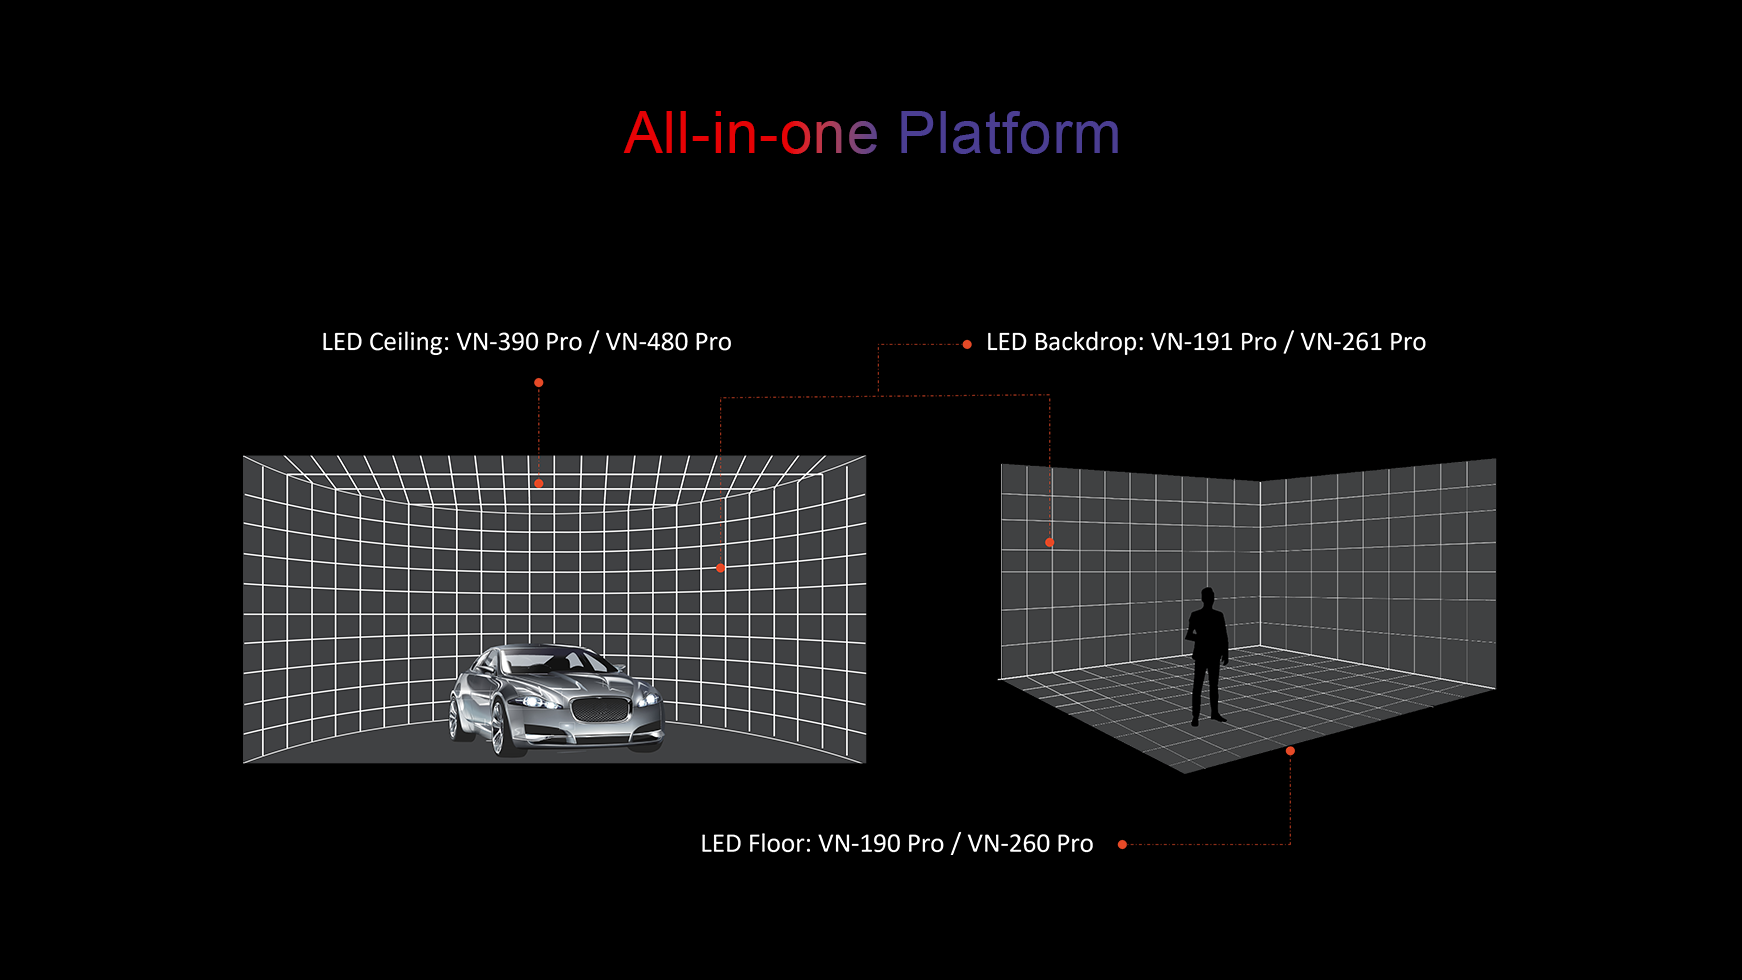 All-in-one Platform